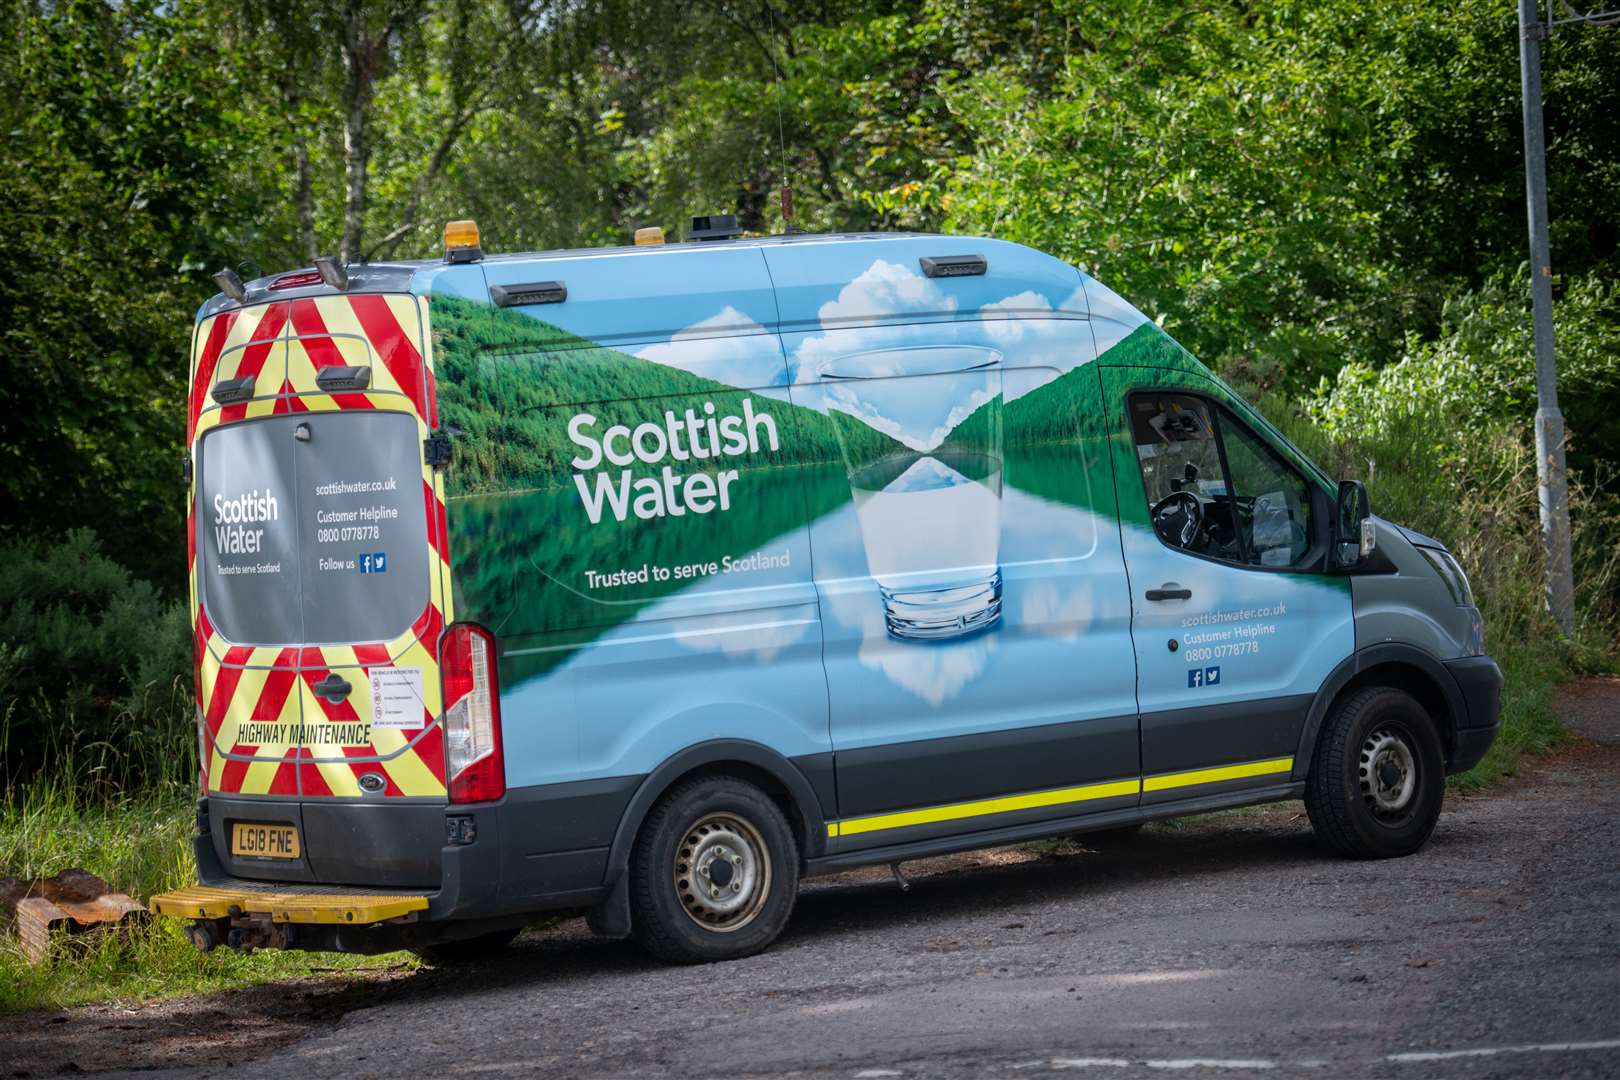 Scottish Water has warned of possible interruption to supplies while it works to fix a fault on the network.